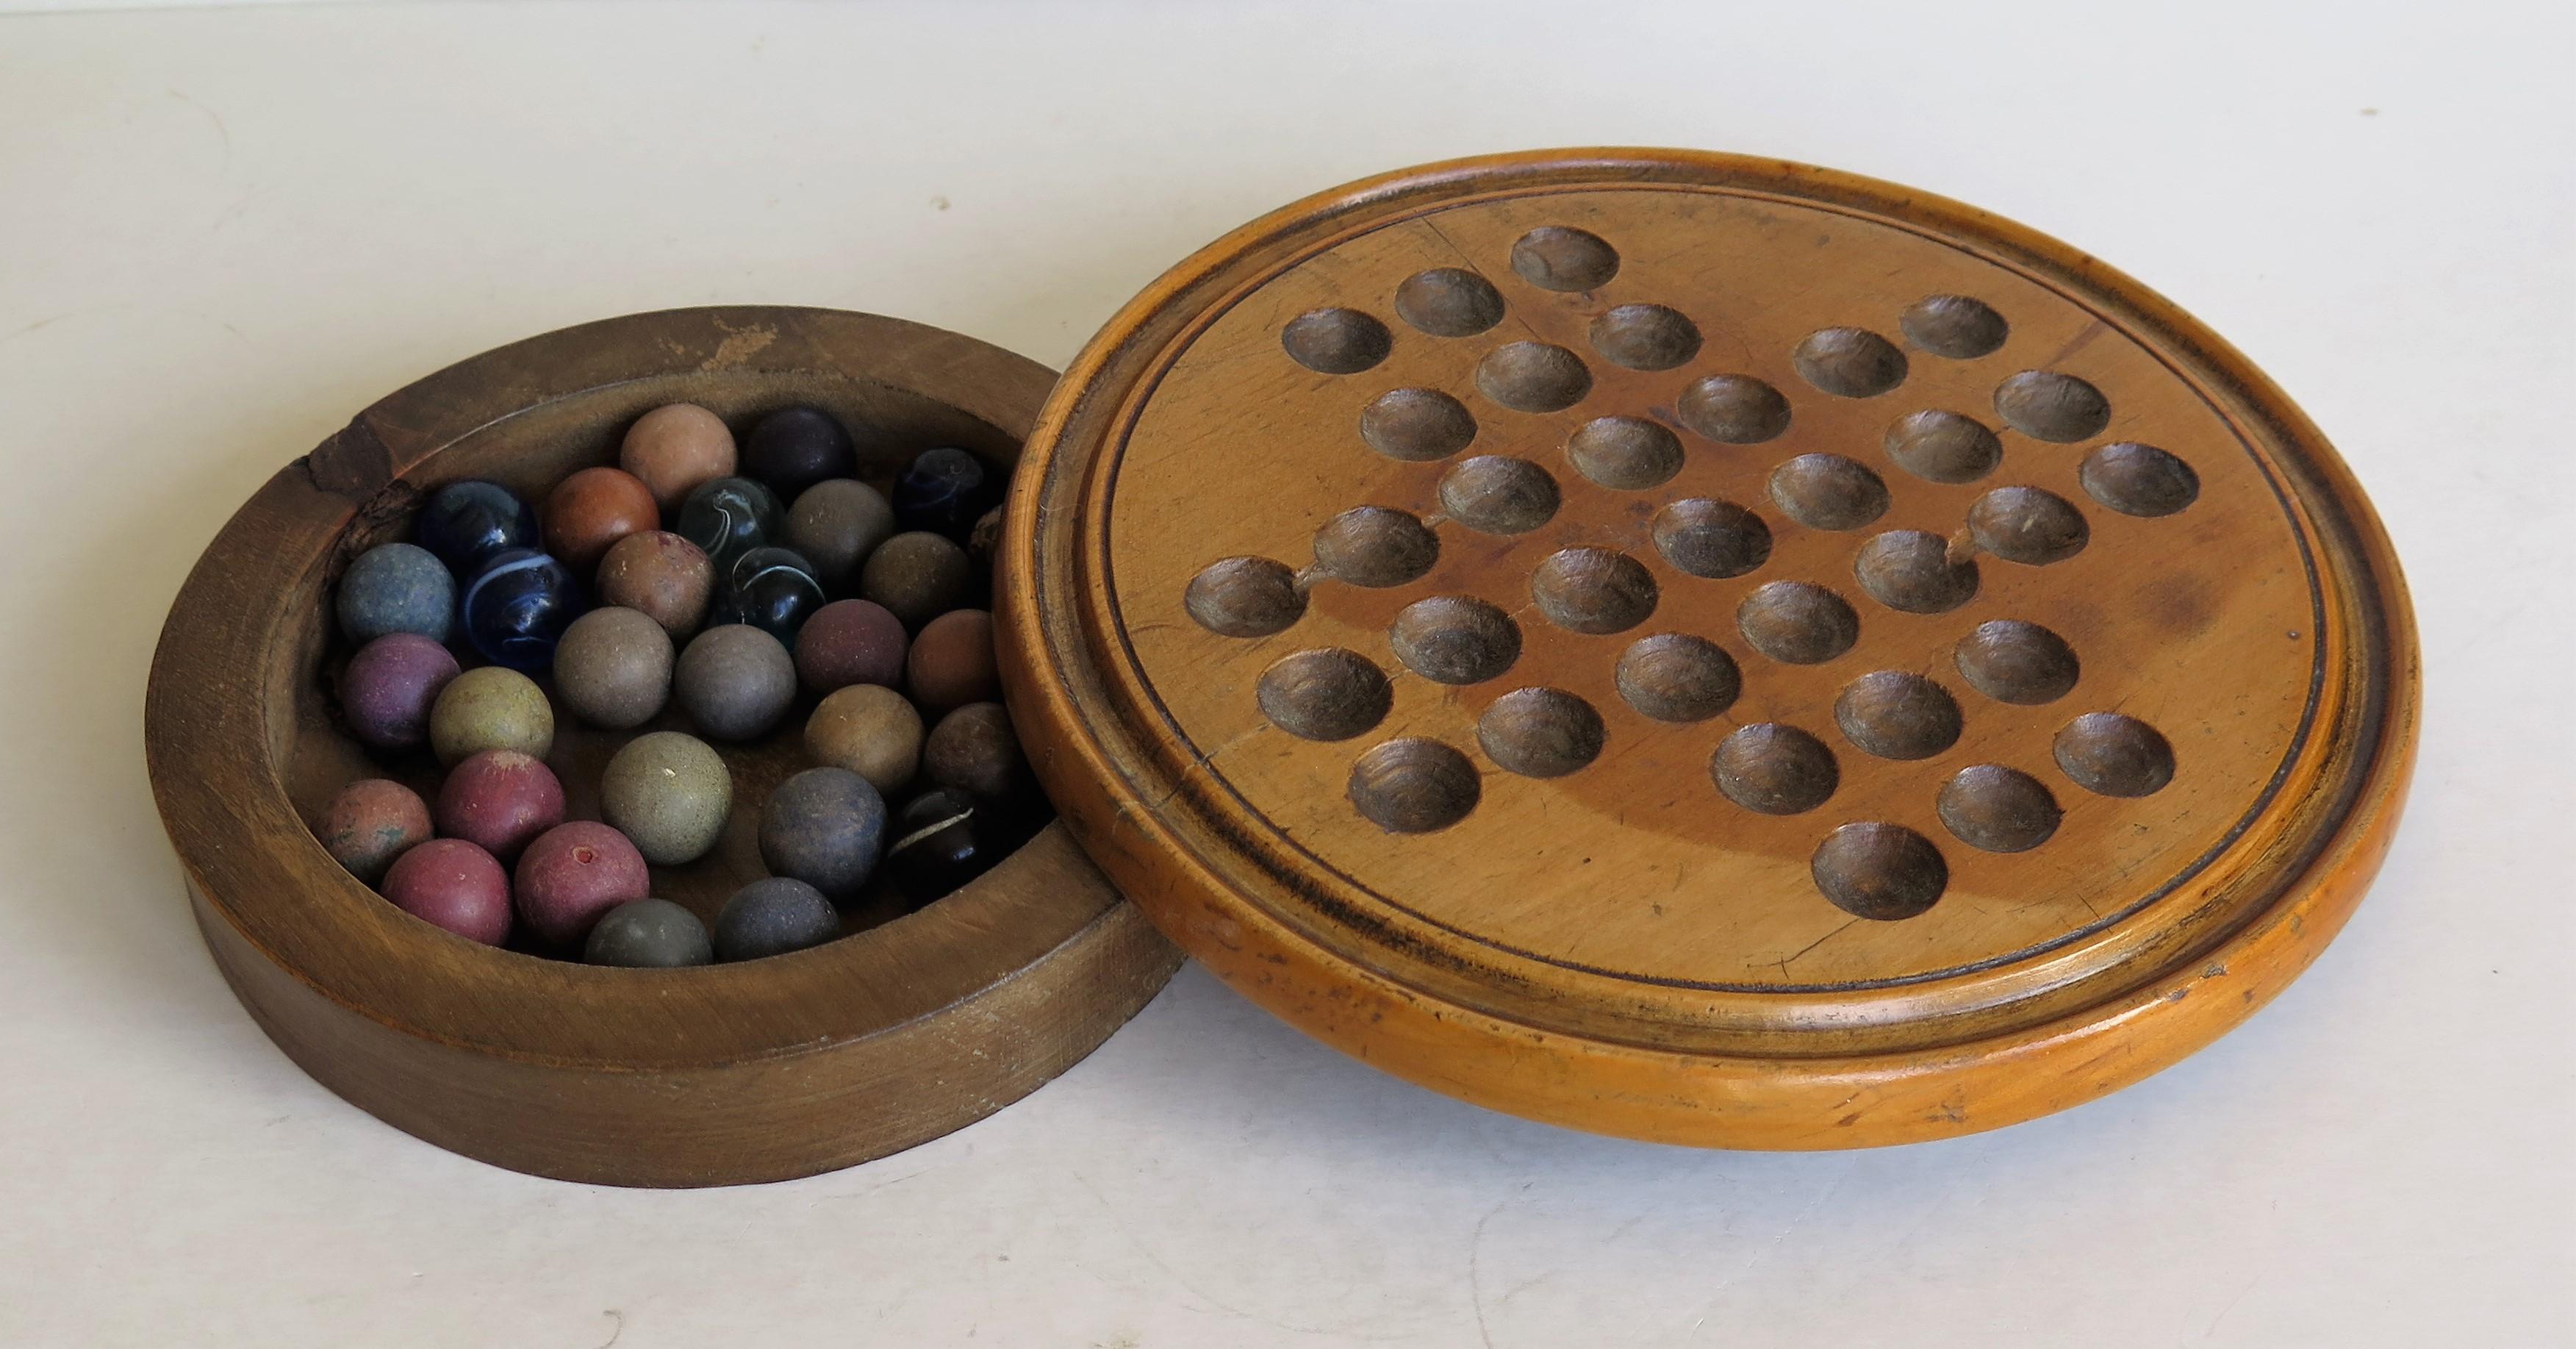 19th Century Travelling Marble Solitaire Board Game, with 32 Handmade Marbles 5